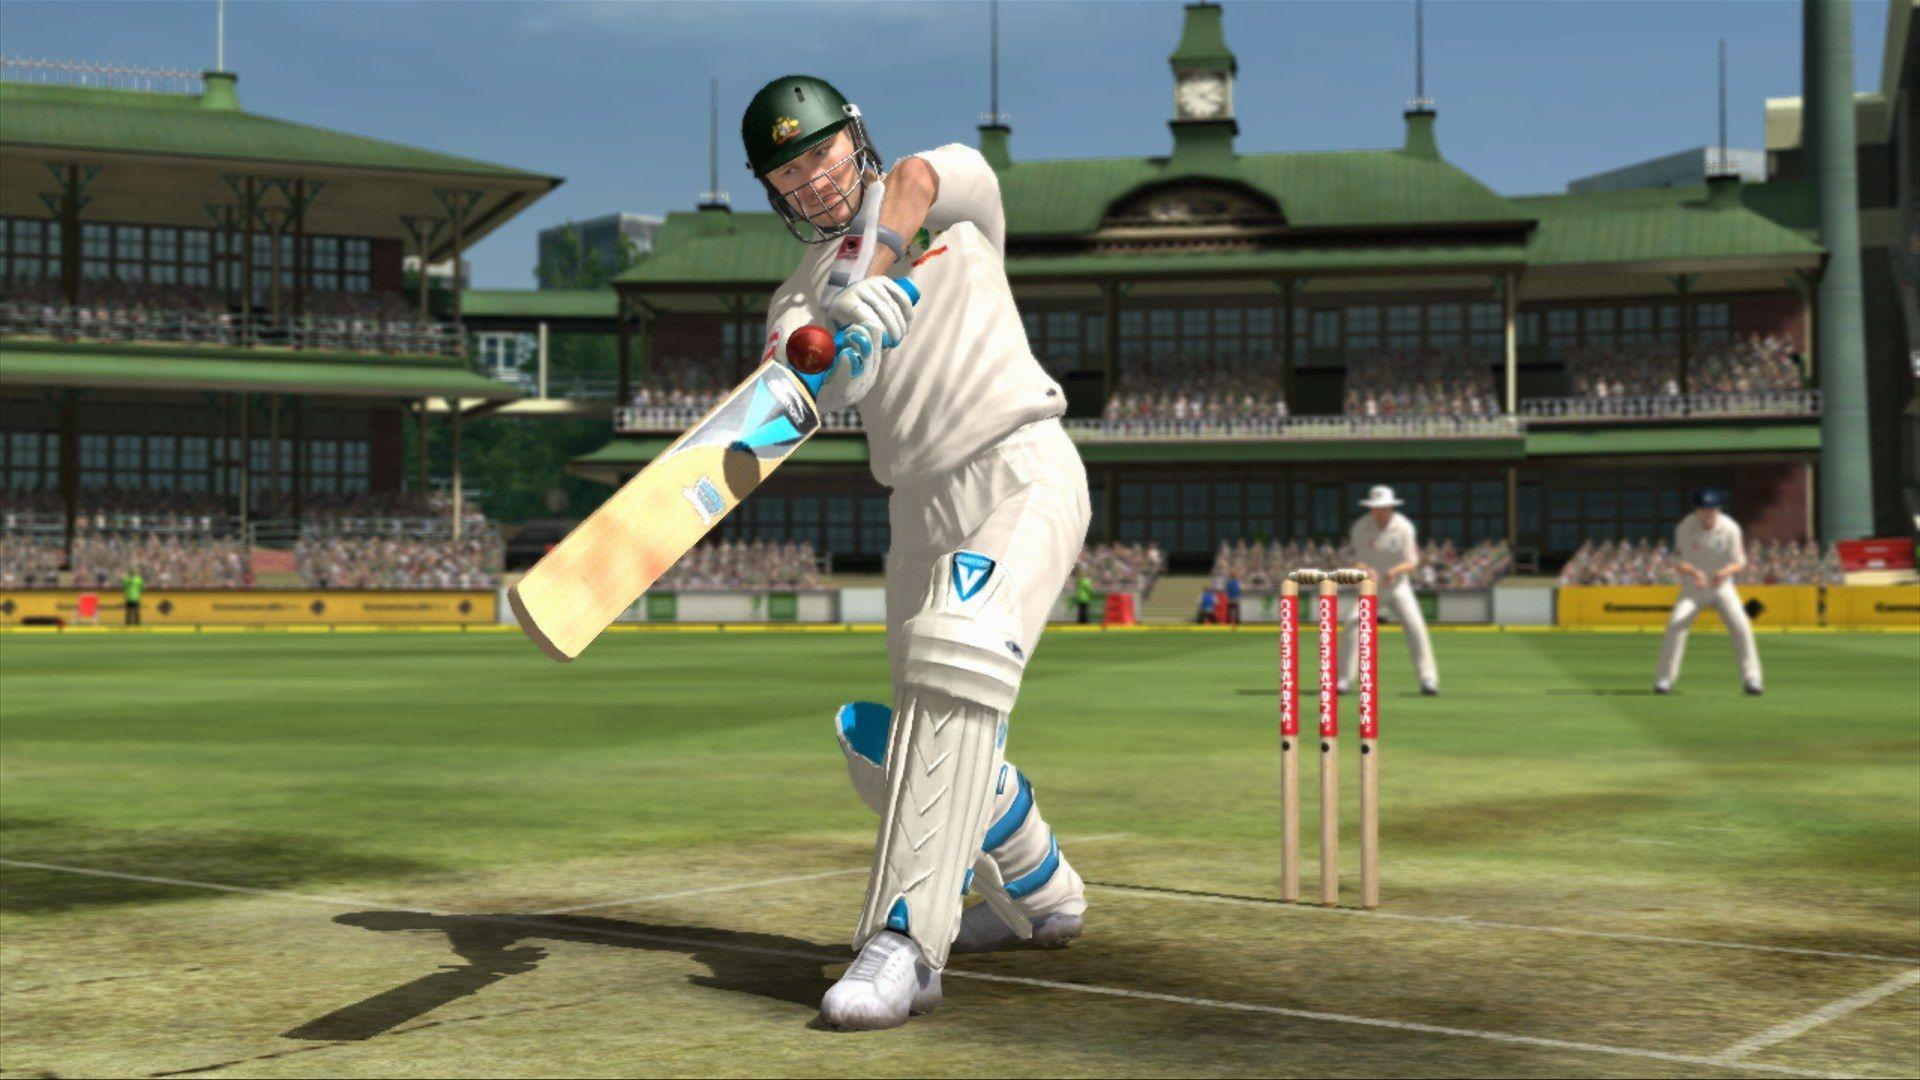 Cricket Game Wallpapers Top Free Cricket Game Backgrounds